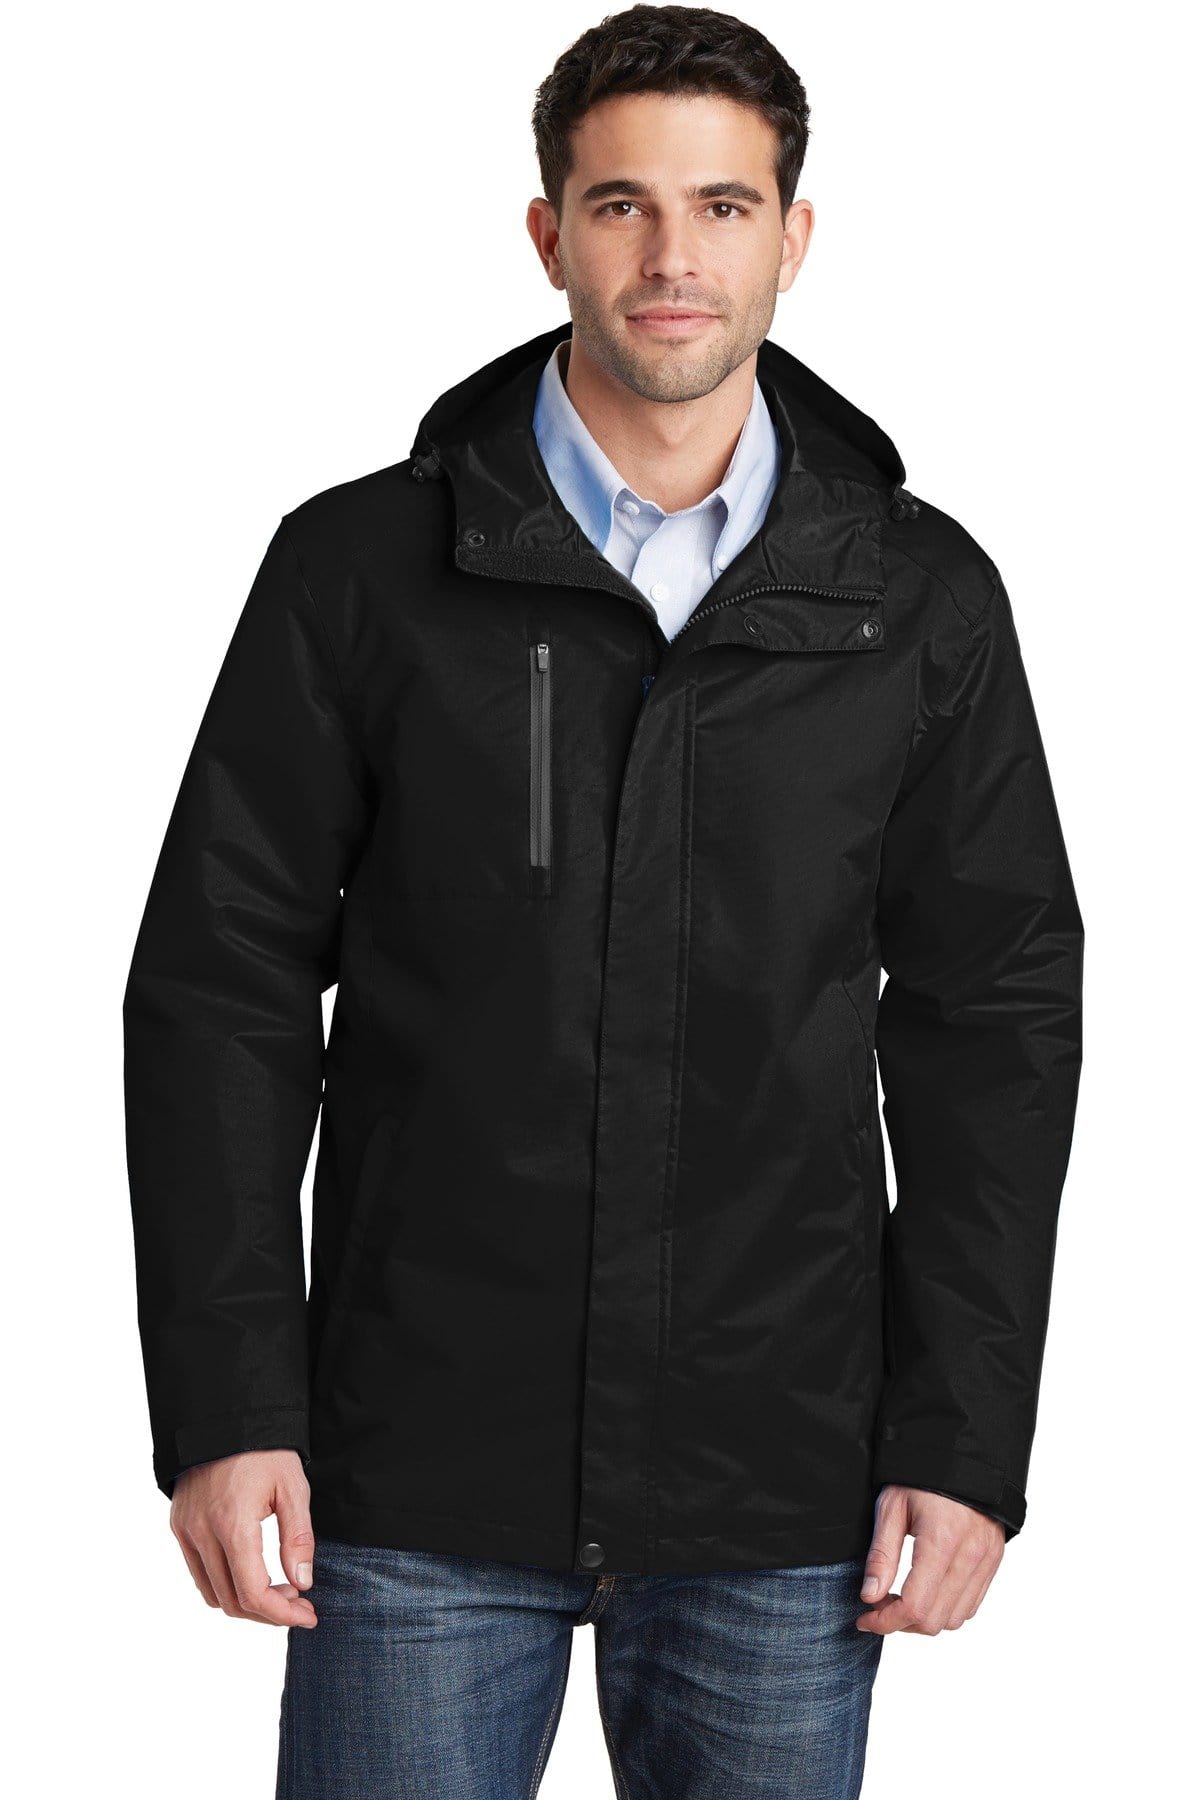 Port Authority All-Conditions Jacket J33116941